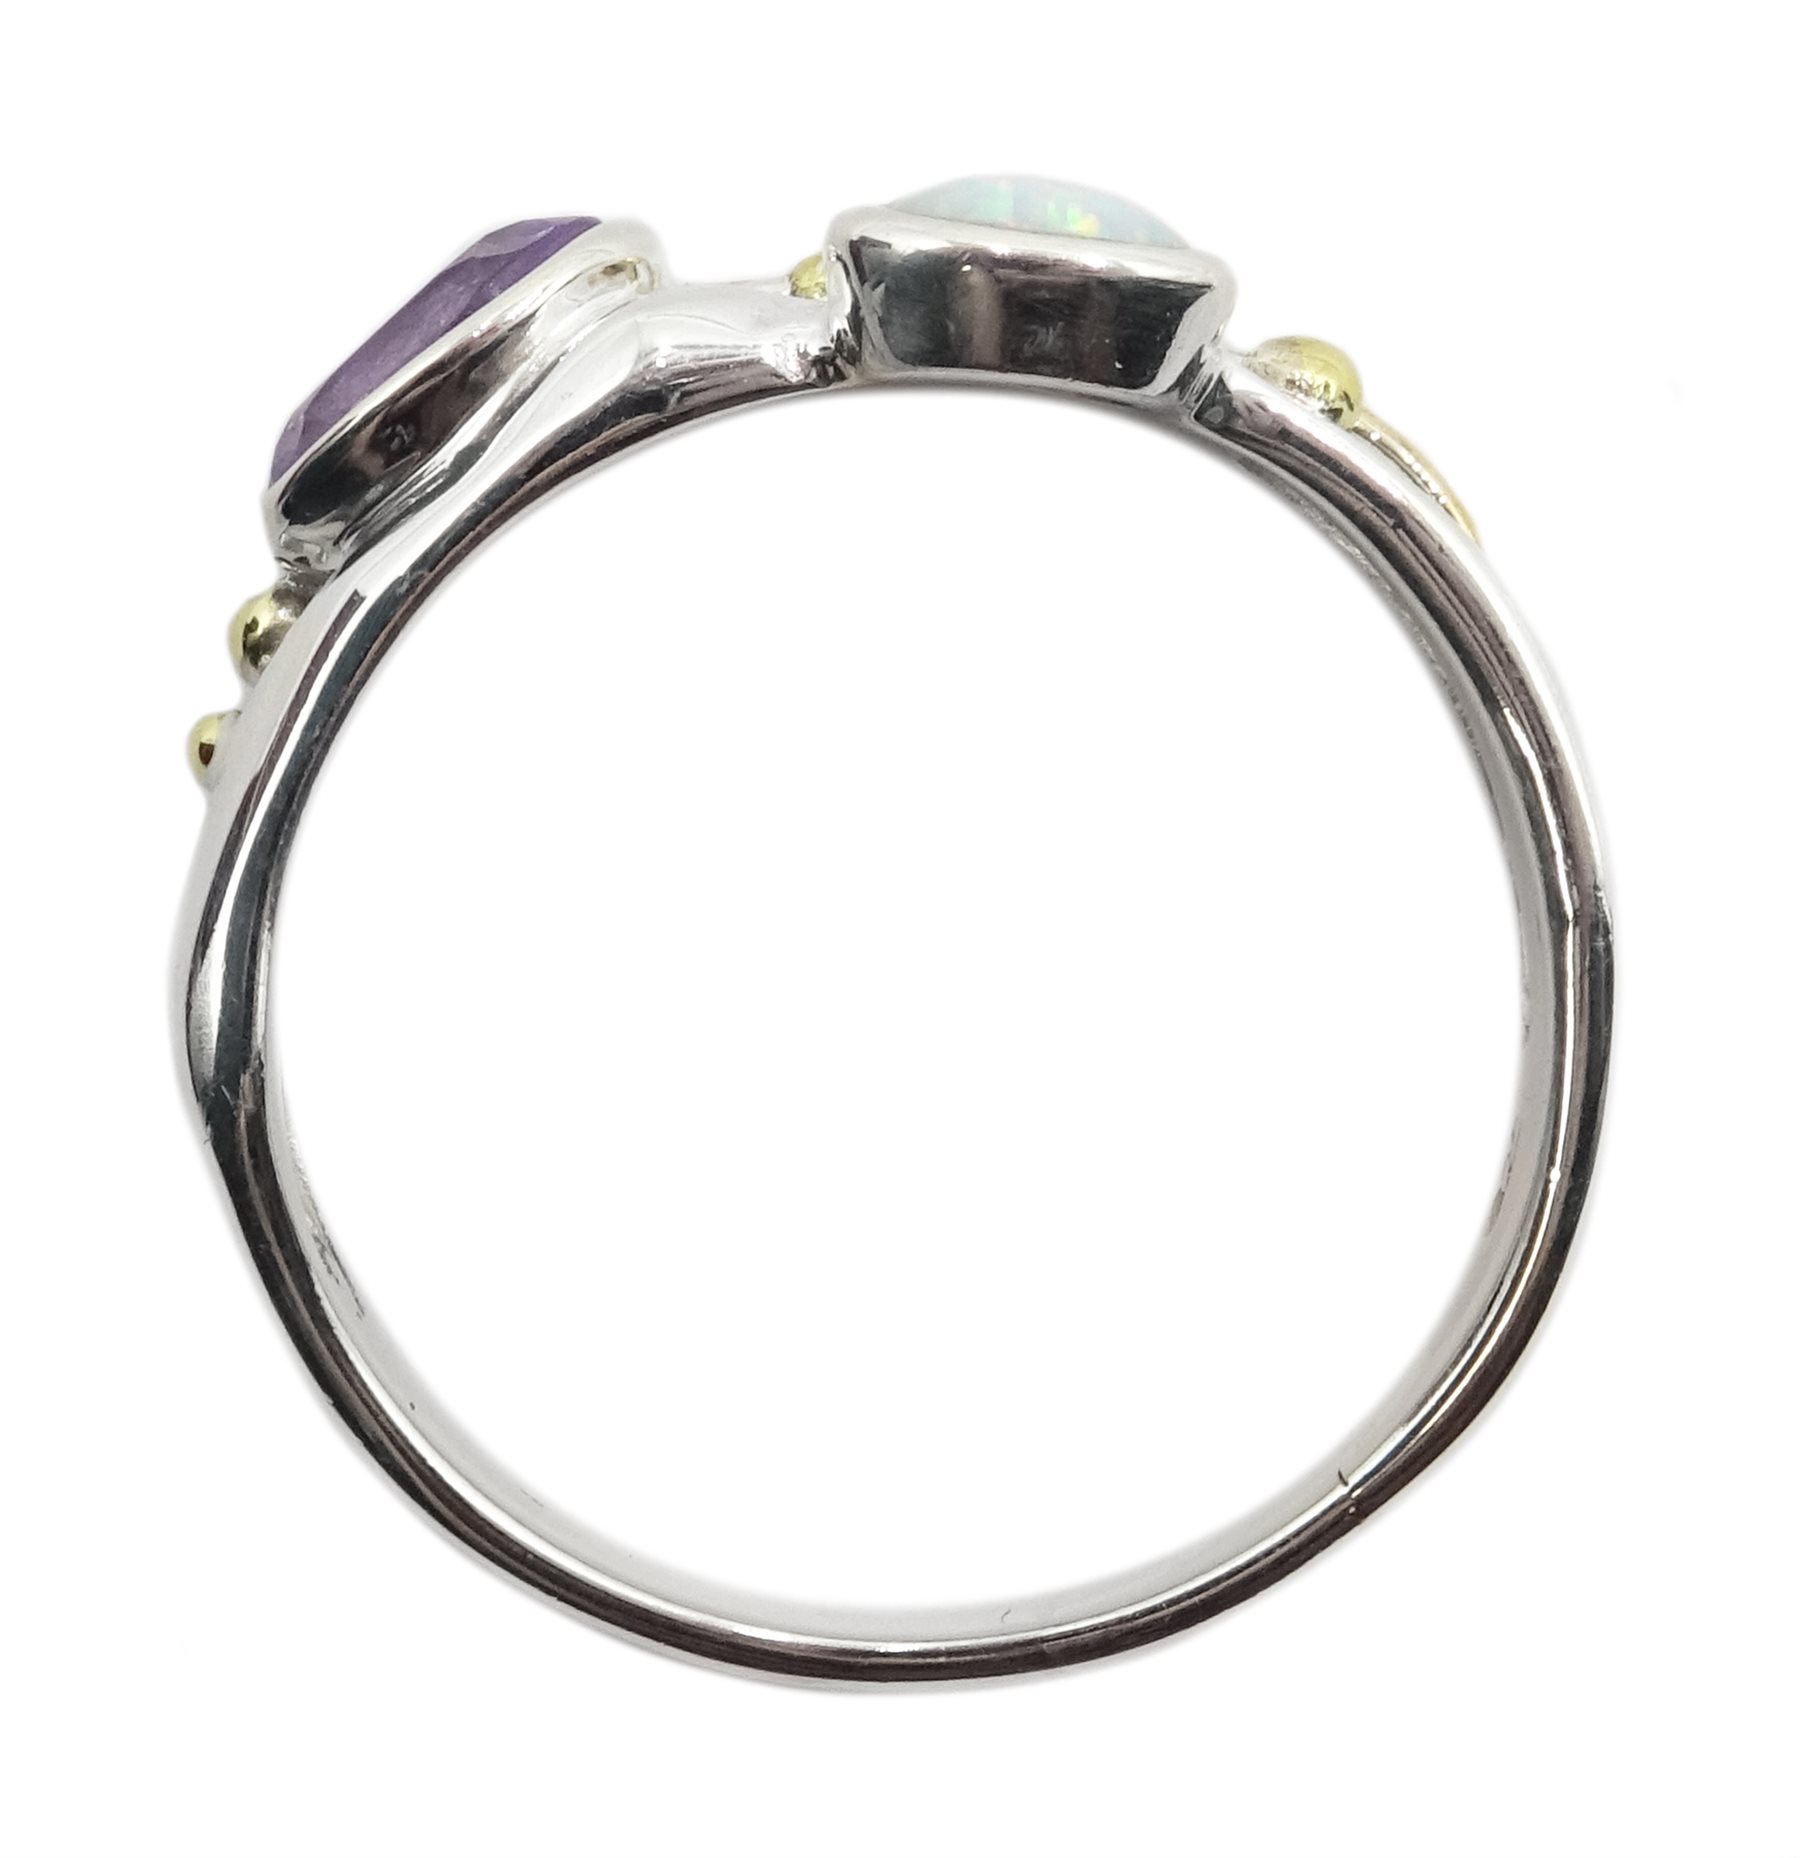 Silver and 14ct gold wire amethyst and opal ring - Image 3 of 3